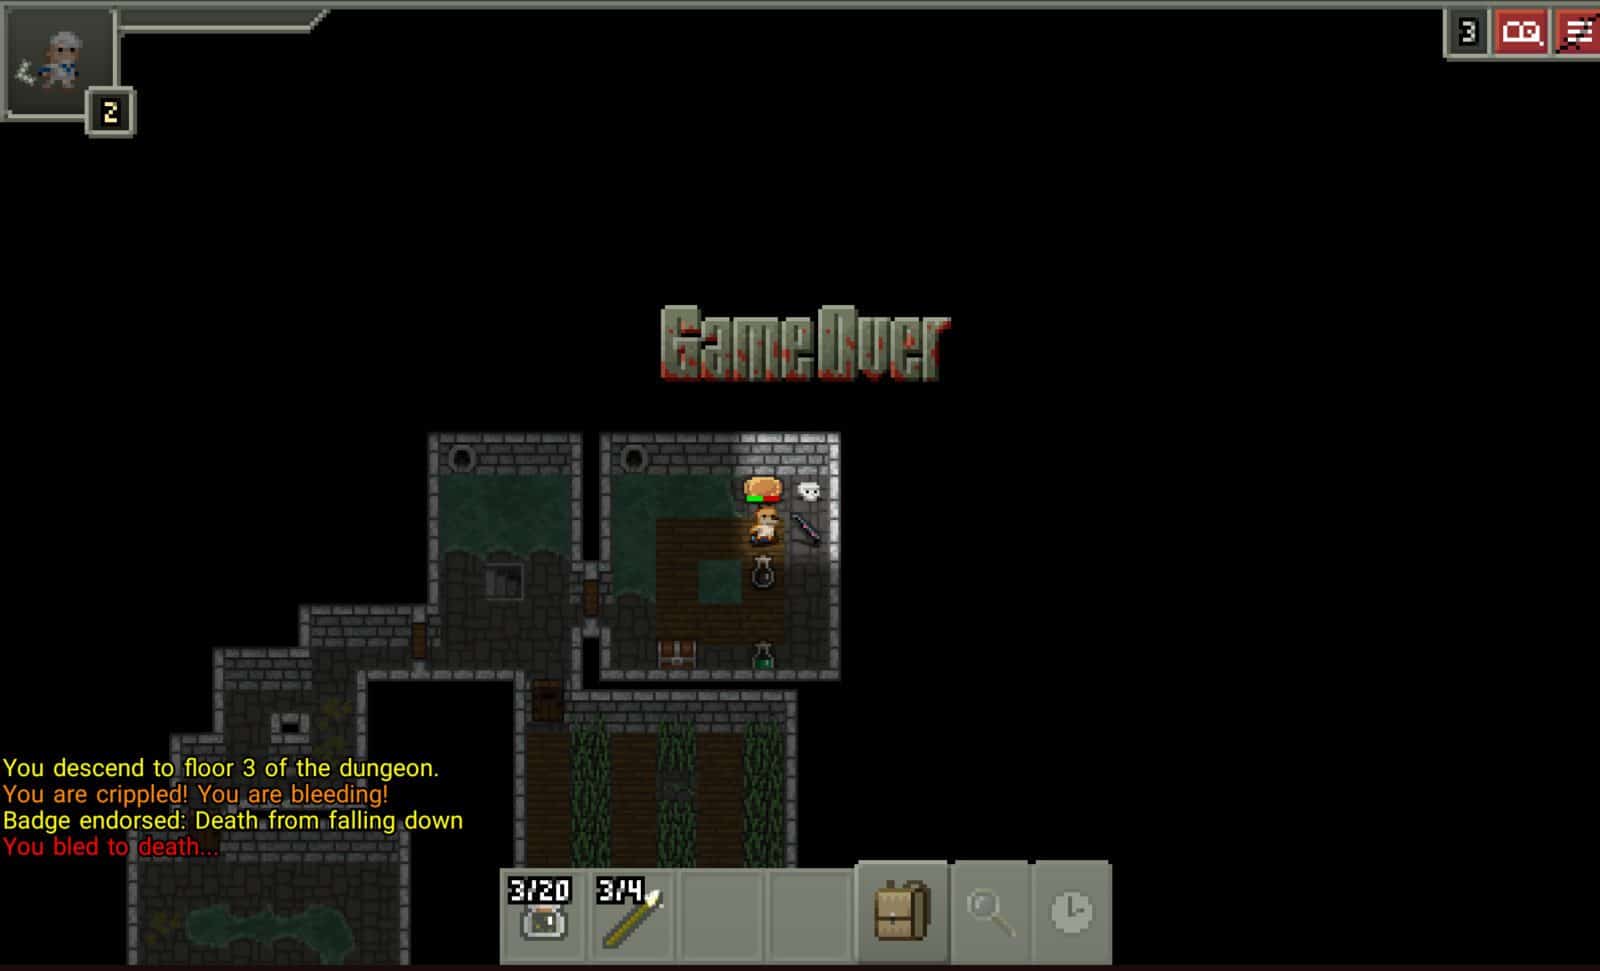 I died in Shattered Pixel Dungeon when I accidentally jumped down to the next floor.